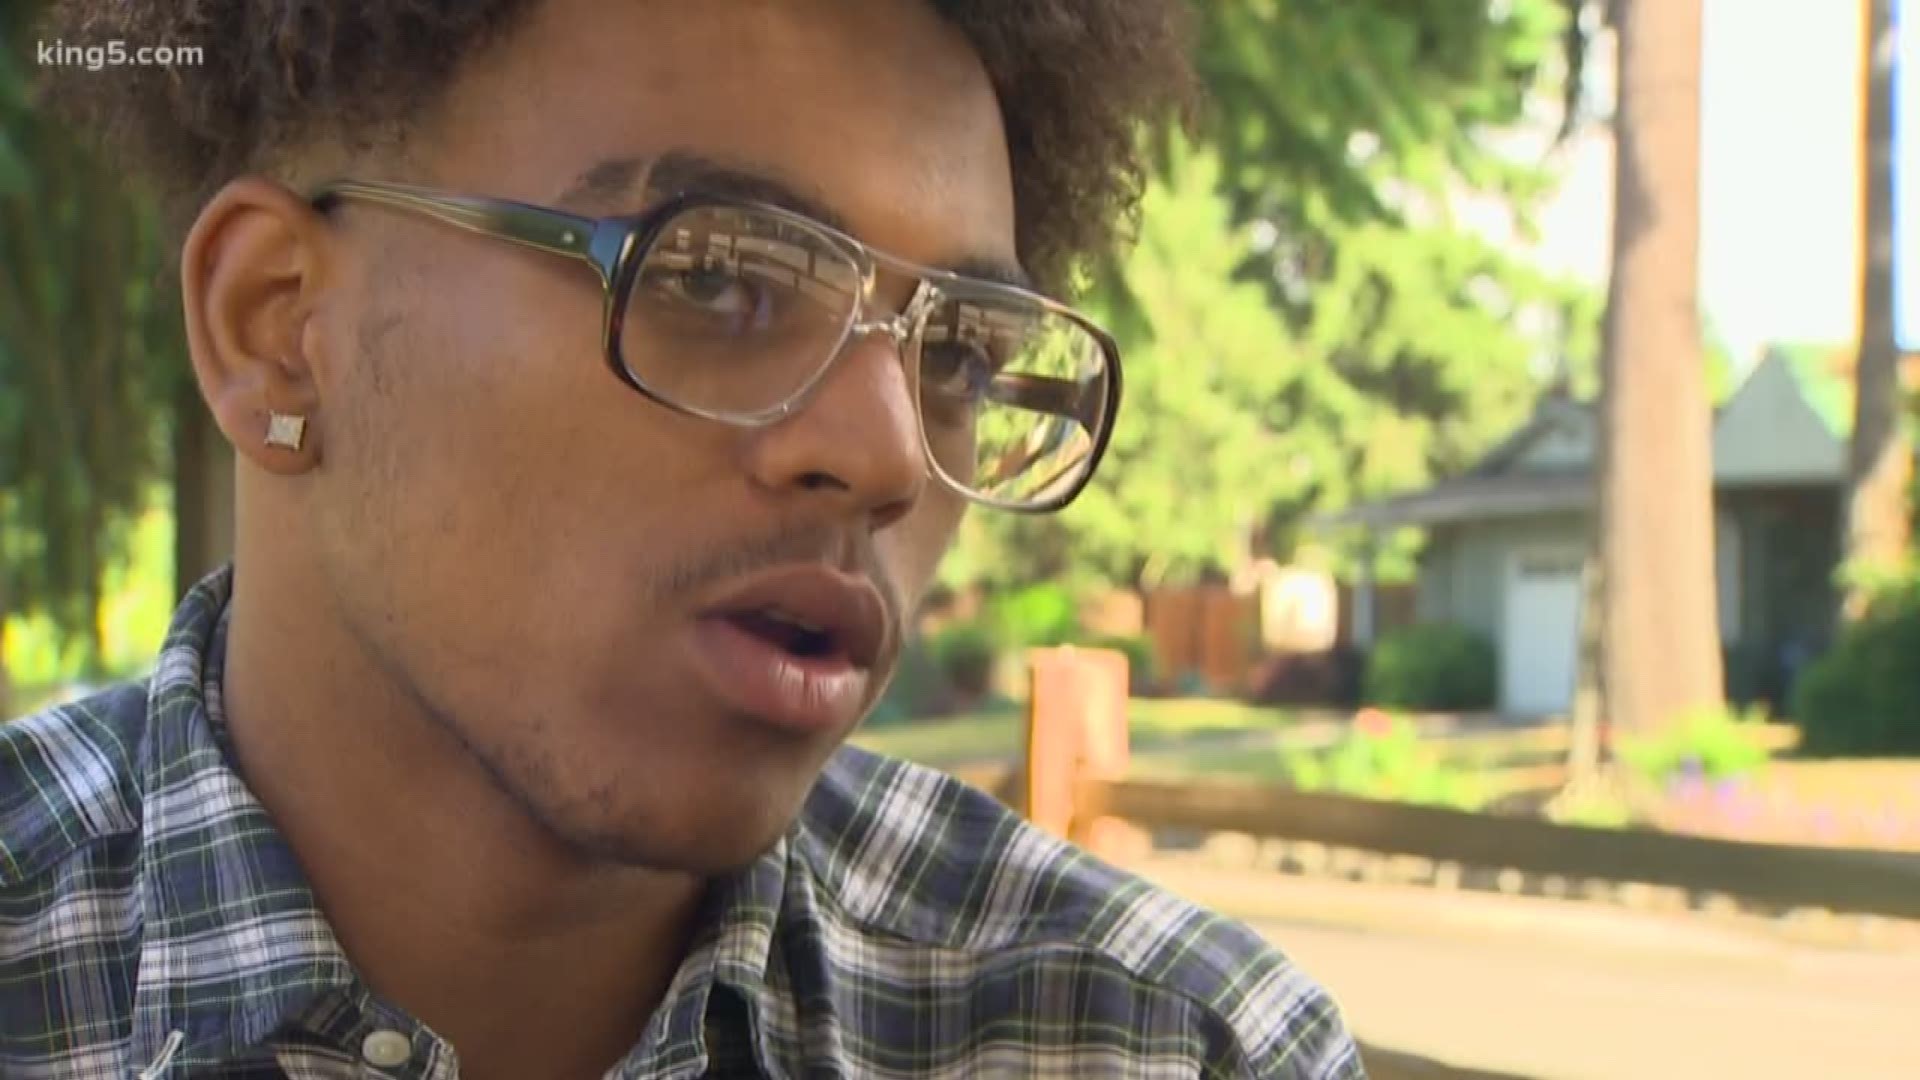 Tacoma teenager Vincenzo Di Salvo used to be homeless. Now he's aiming to be the first in his family to attend college. KING 5's Jenna Hanchard reports.